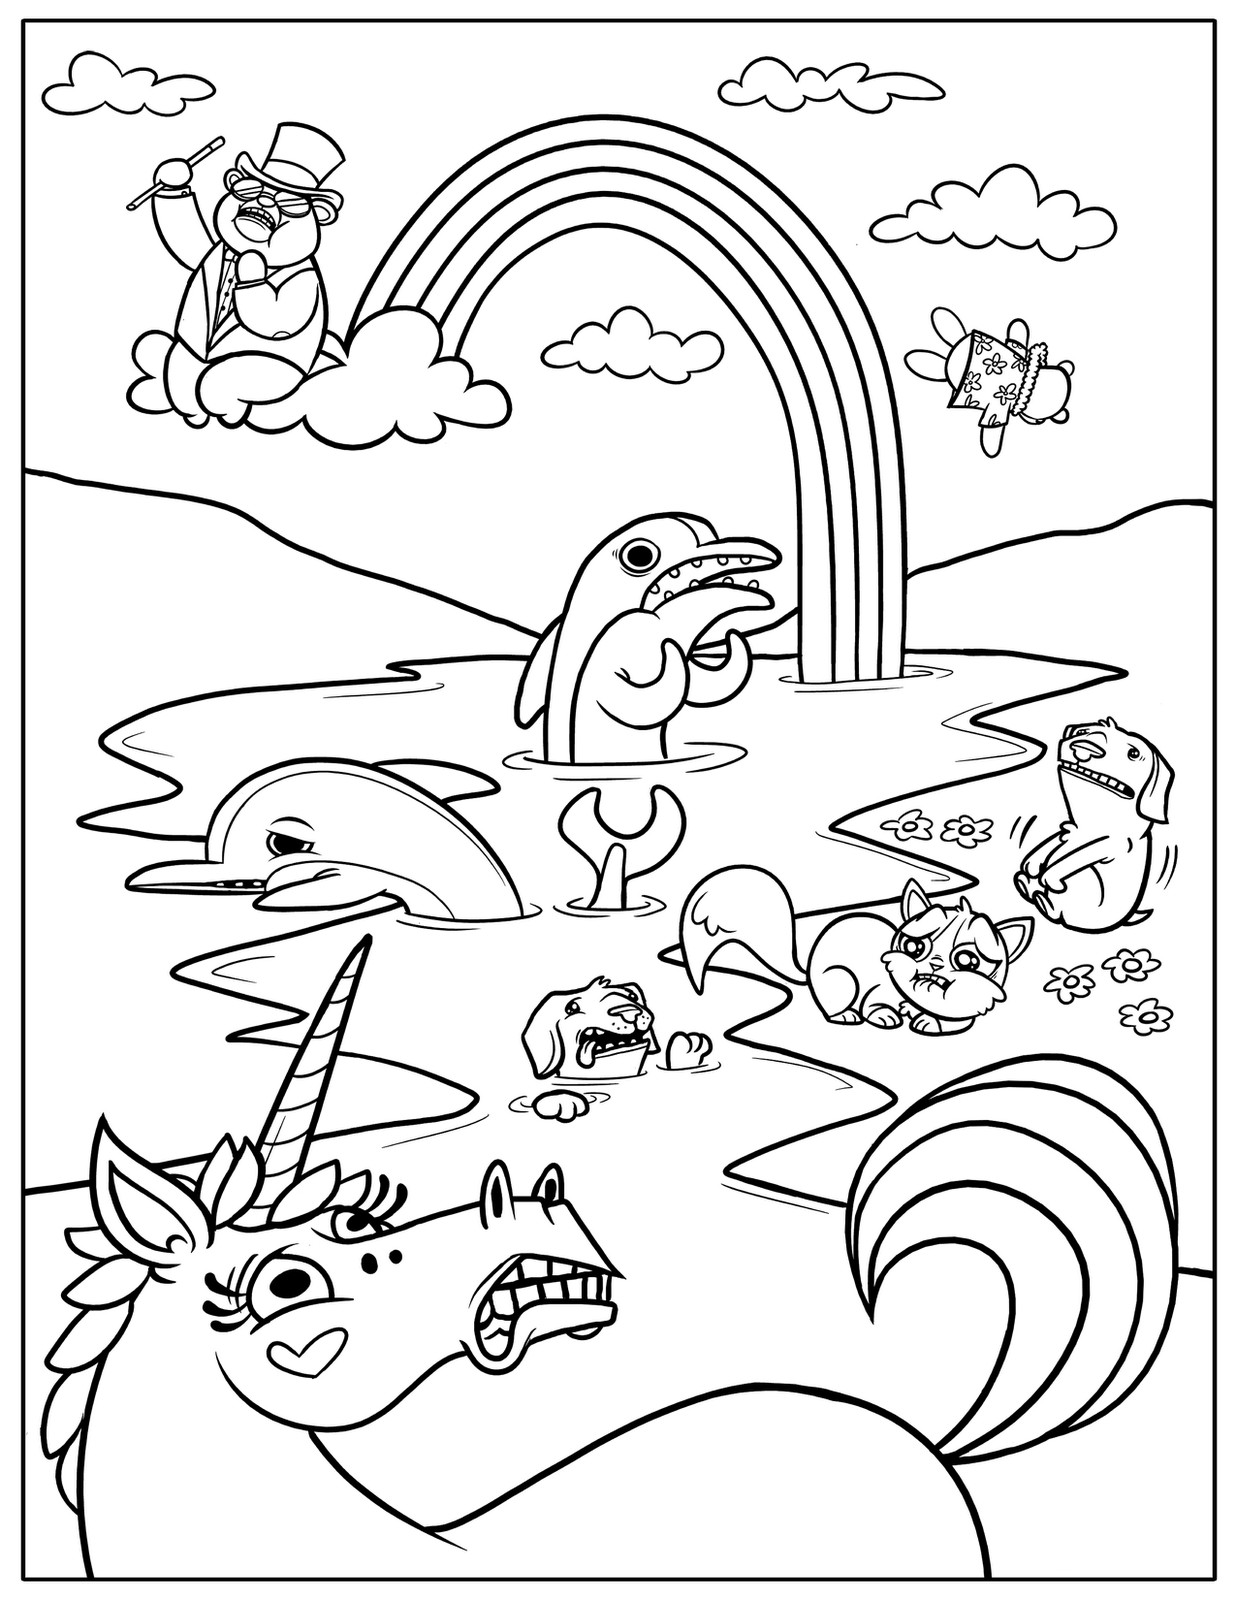 Online Coloring Games For Kids
 Free Printable Rainbow Coloring Pages For Kids